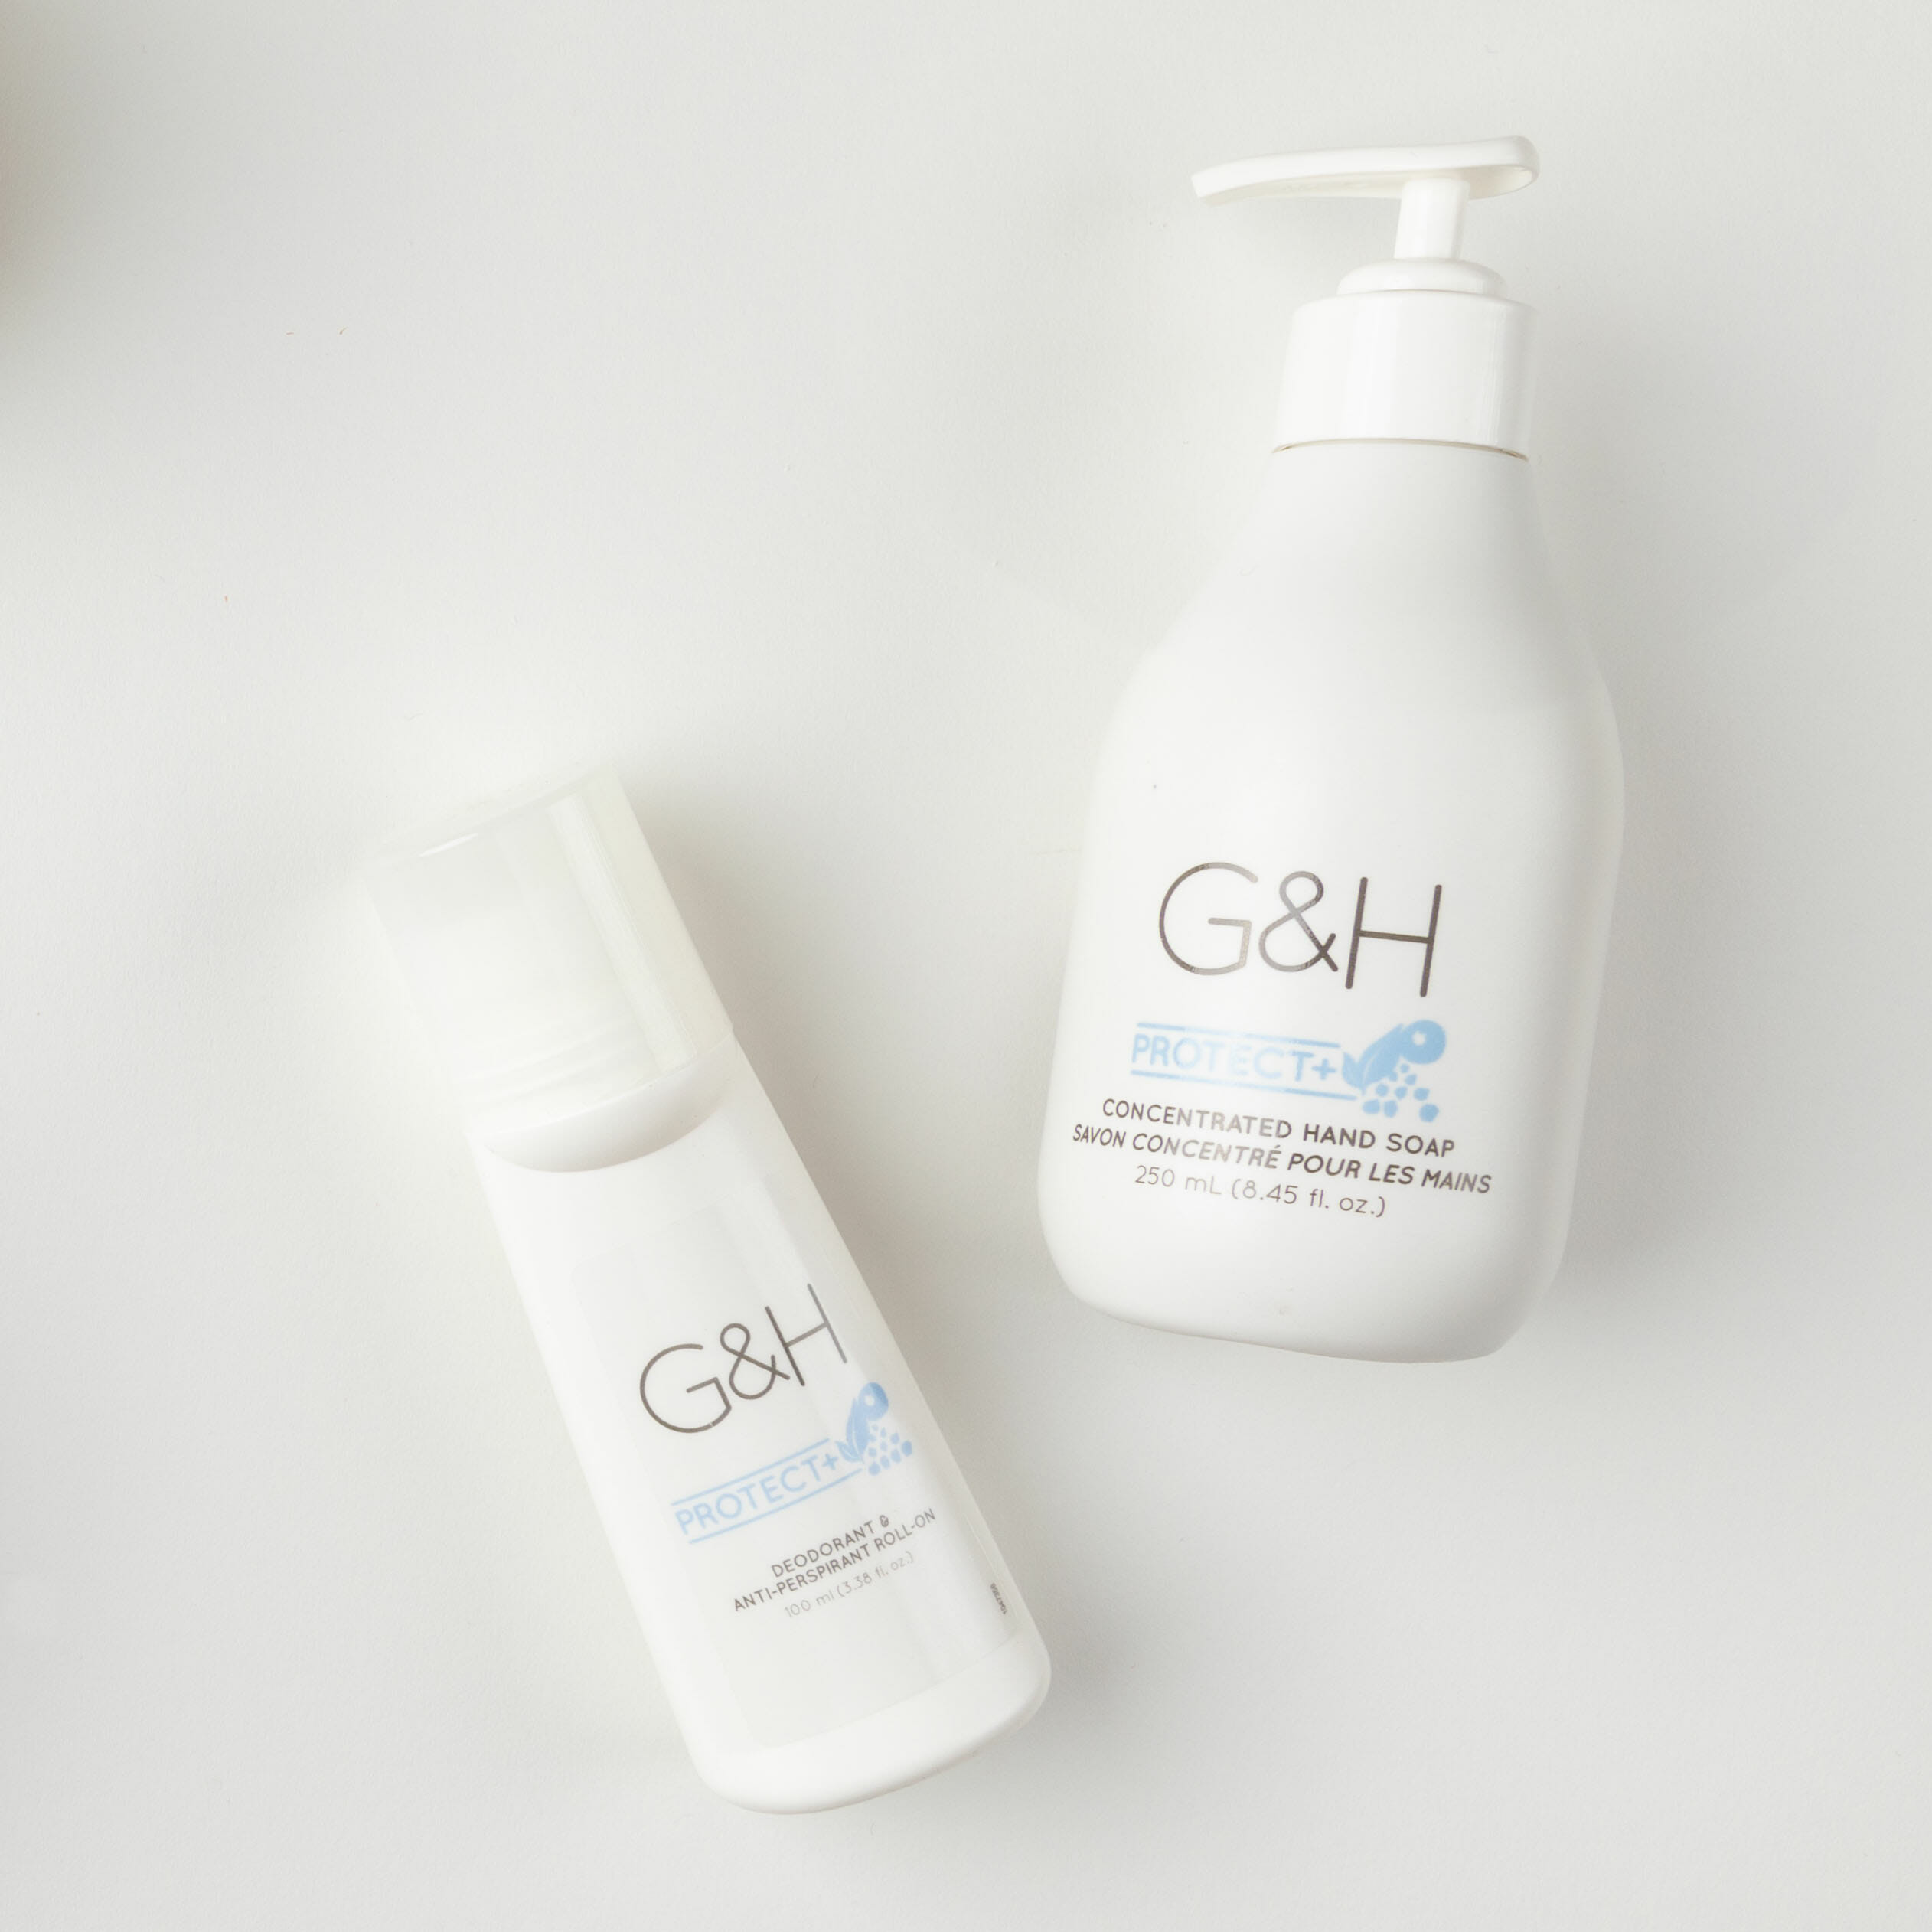 G&H Deodrant and Hand Soap on white background